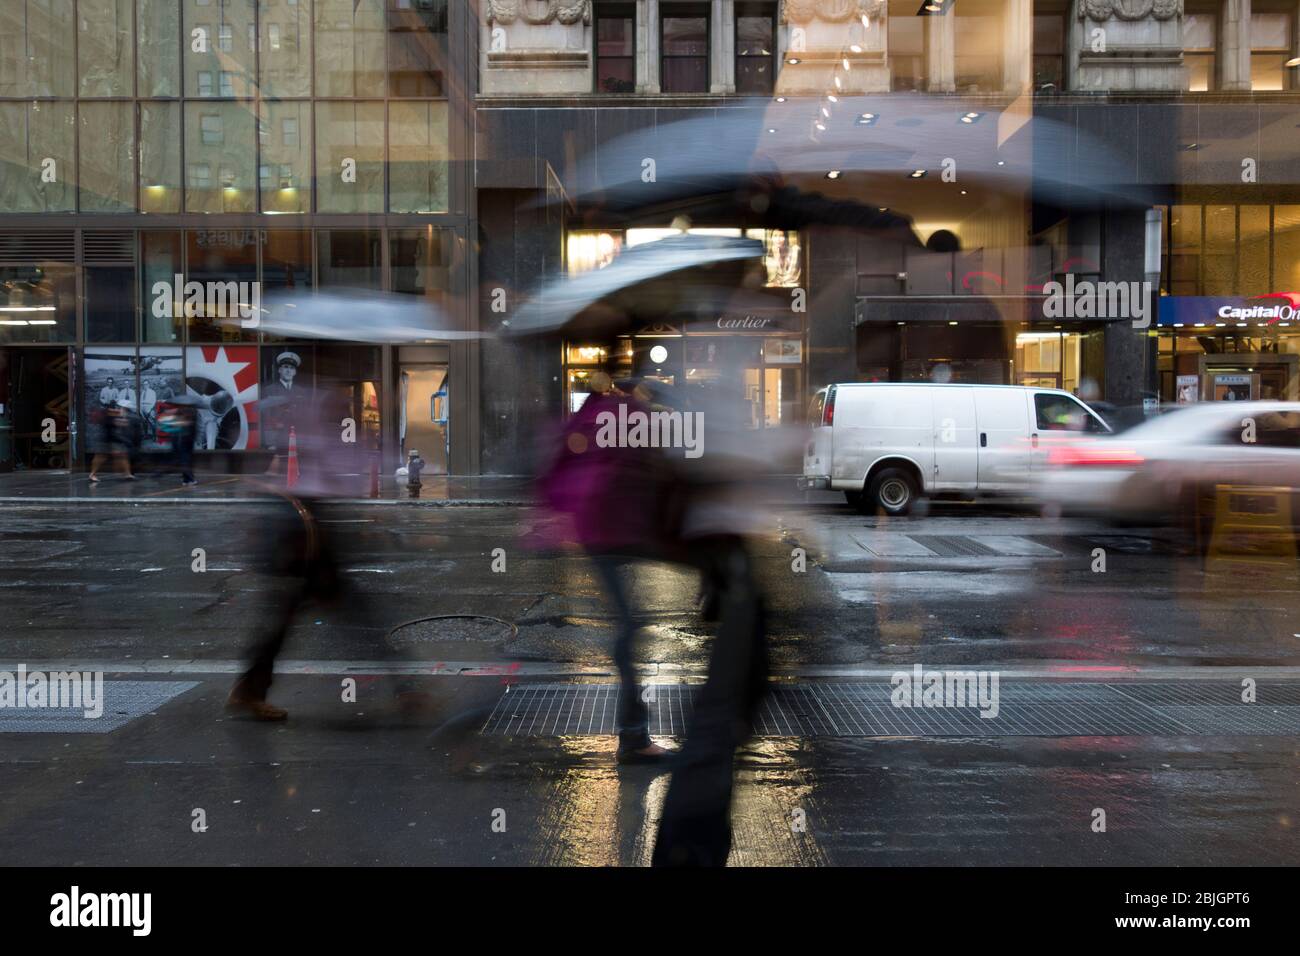 Pedestrians in motion on a moody, rainly day in lower Manhattan, New York City Stock Photo